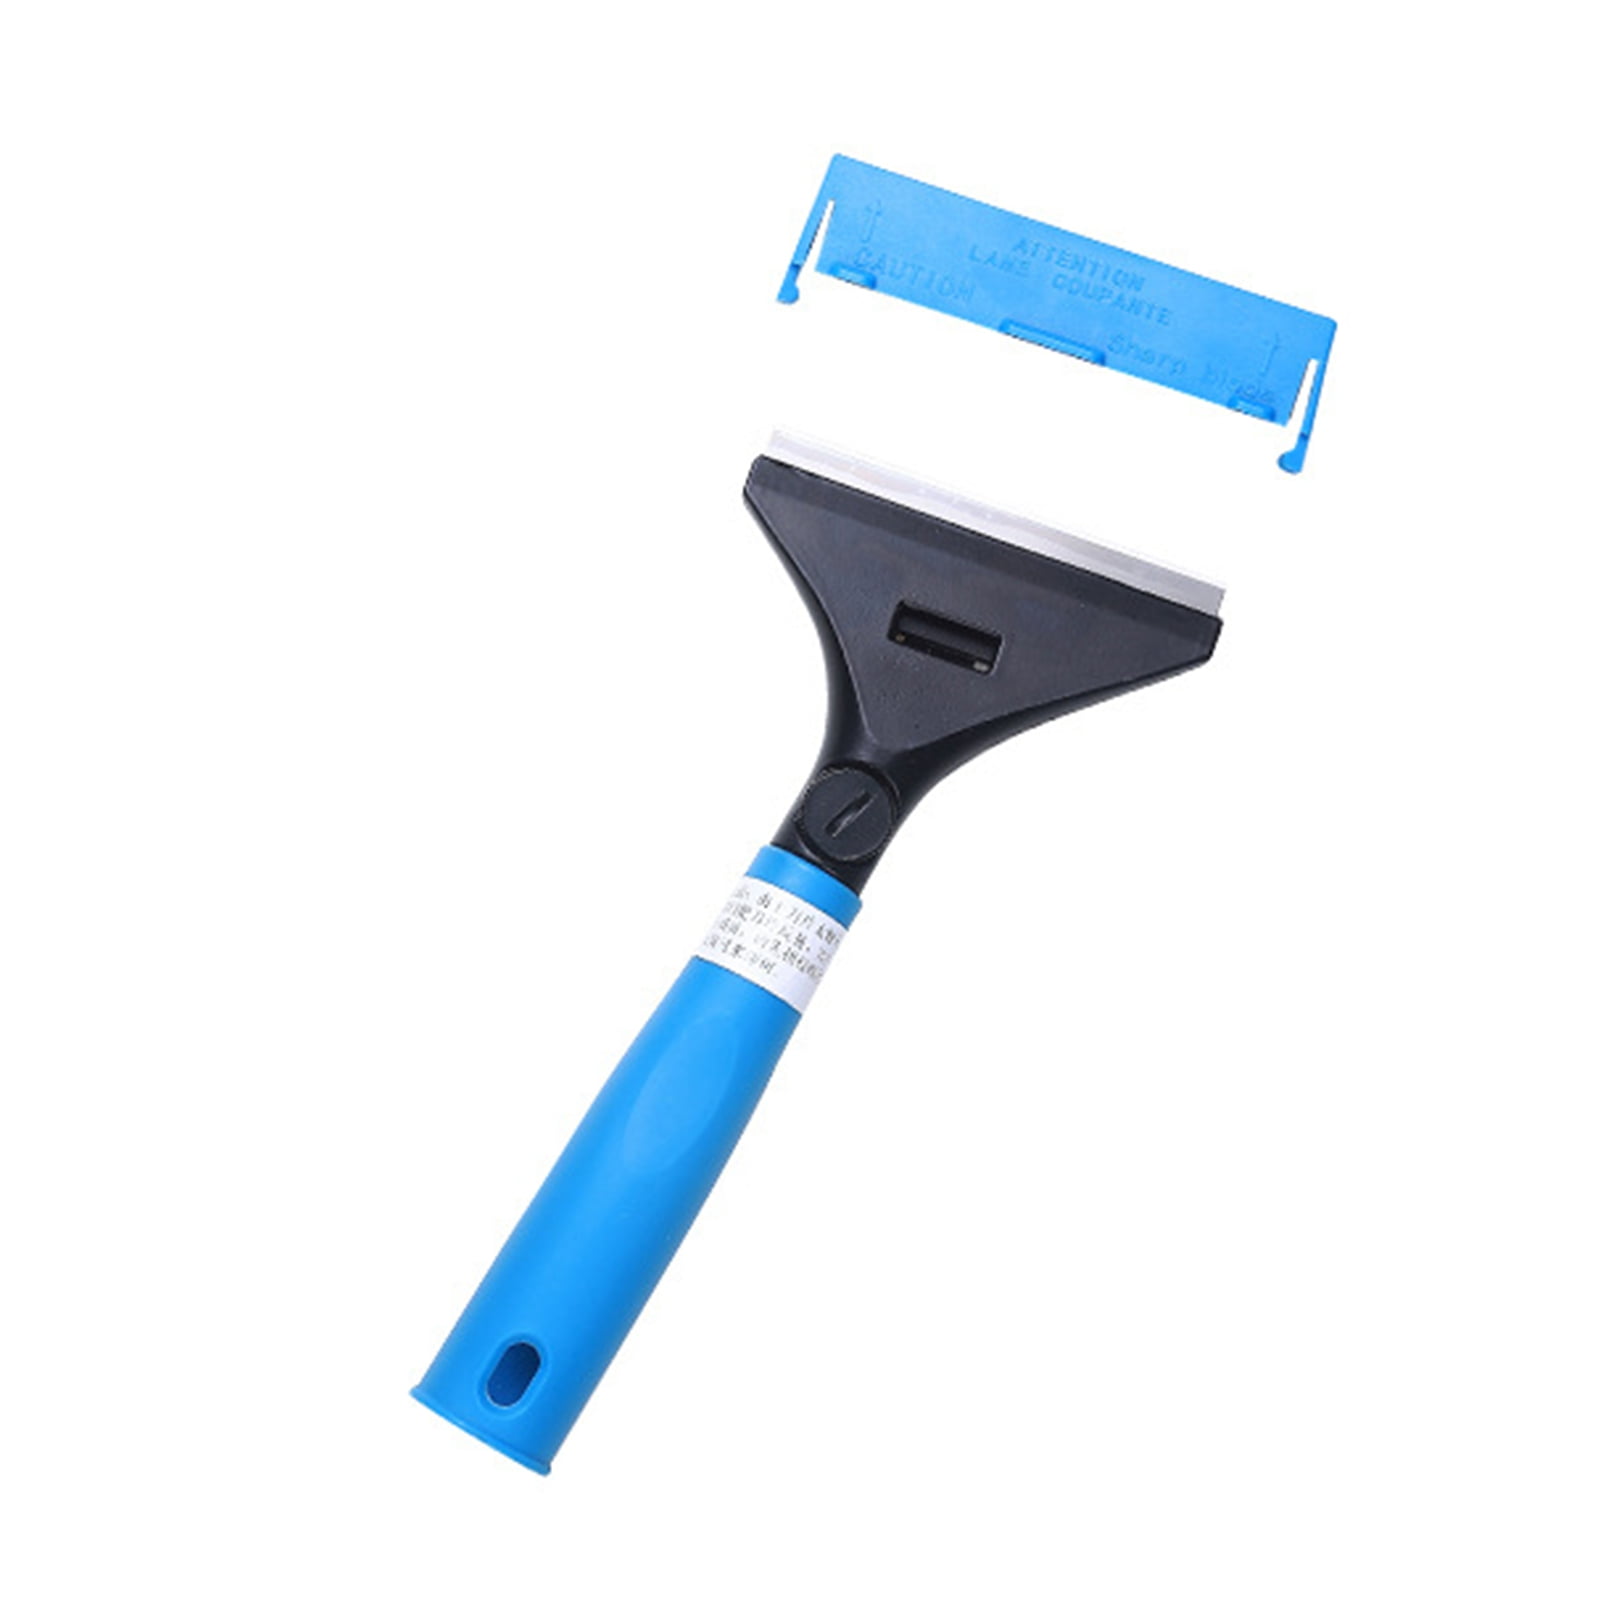 Free Shipping Silicone Sealant Removal Tool High Quality Plastic Fixed With  Stainless Steel Remover Silicone Trowel And Scraper - Caulking Gun -  AliExpress